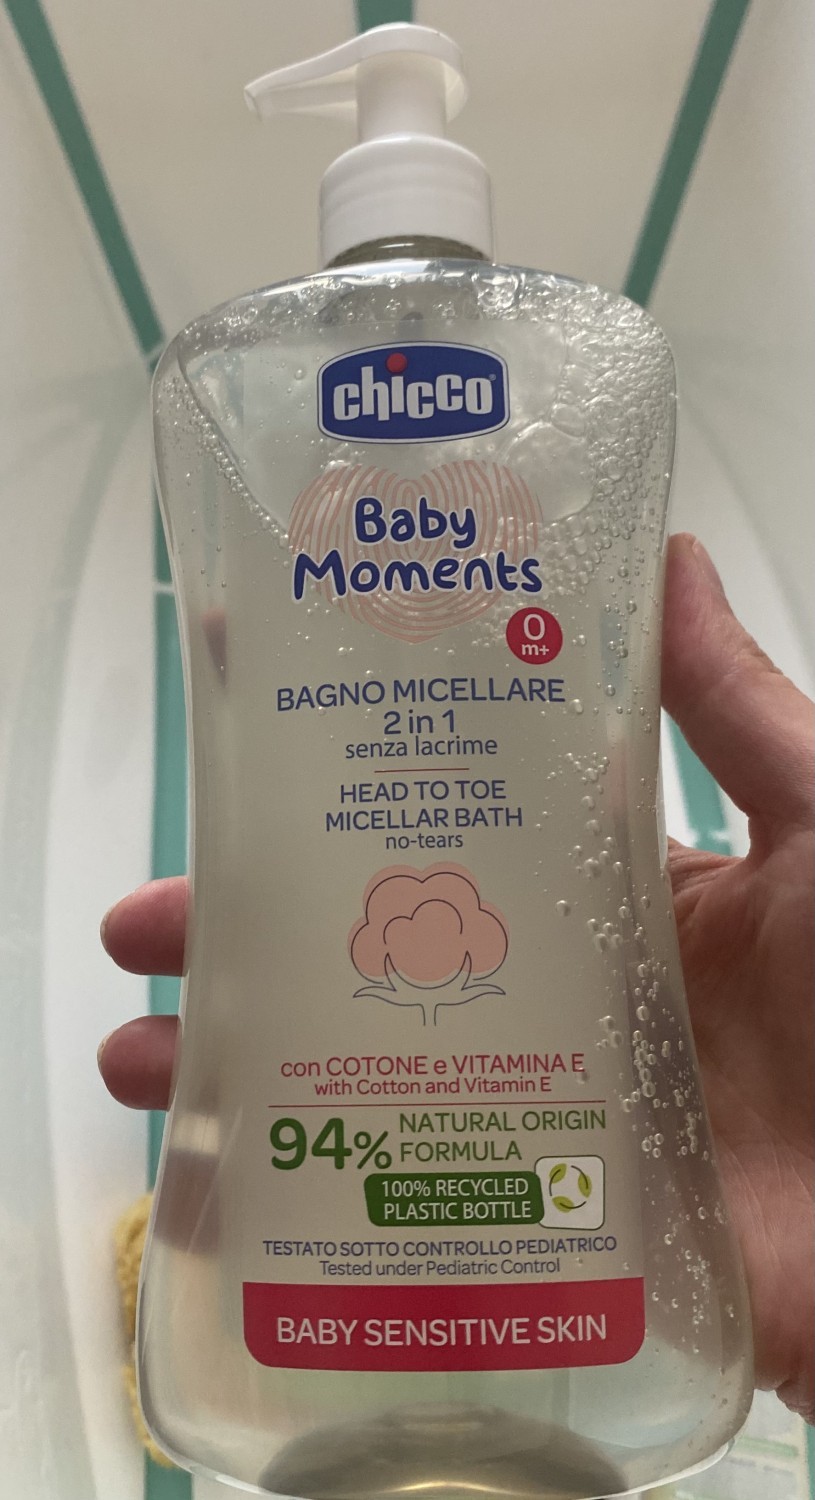 Chicco baby moments